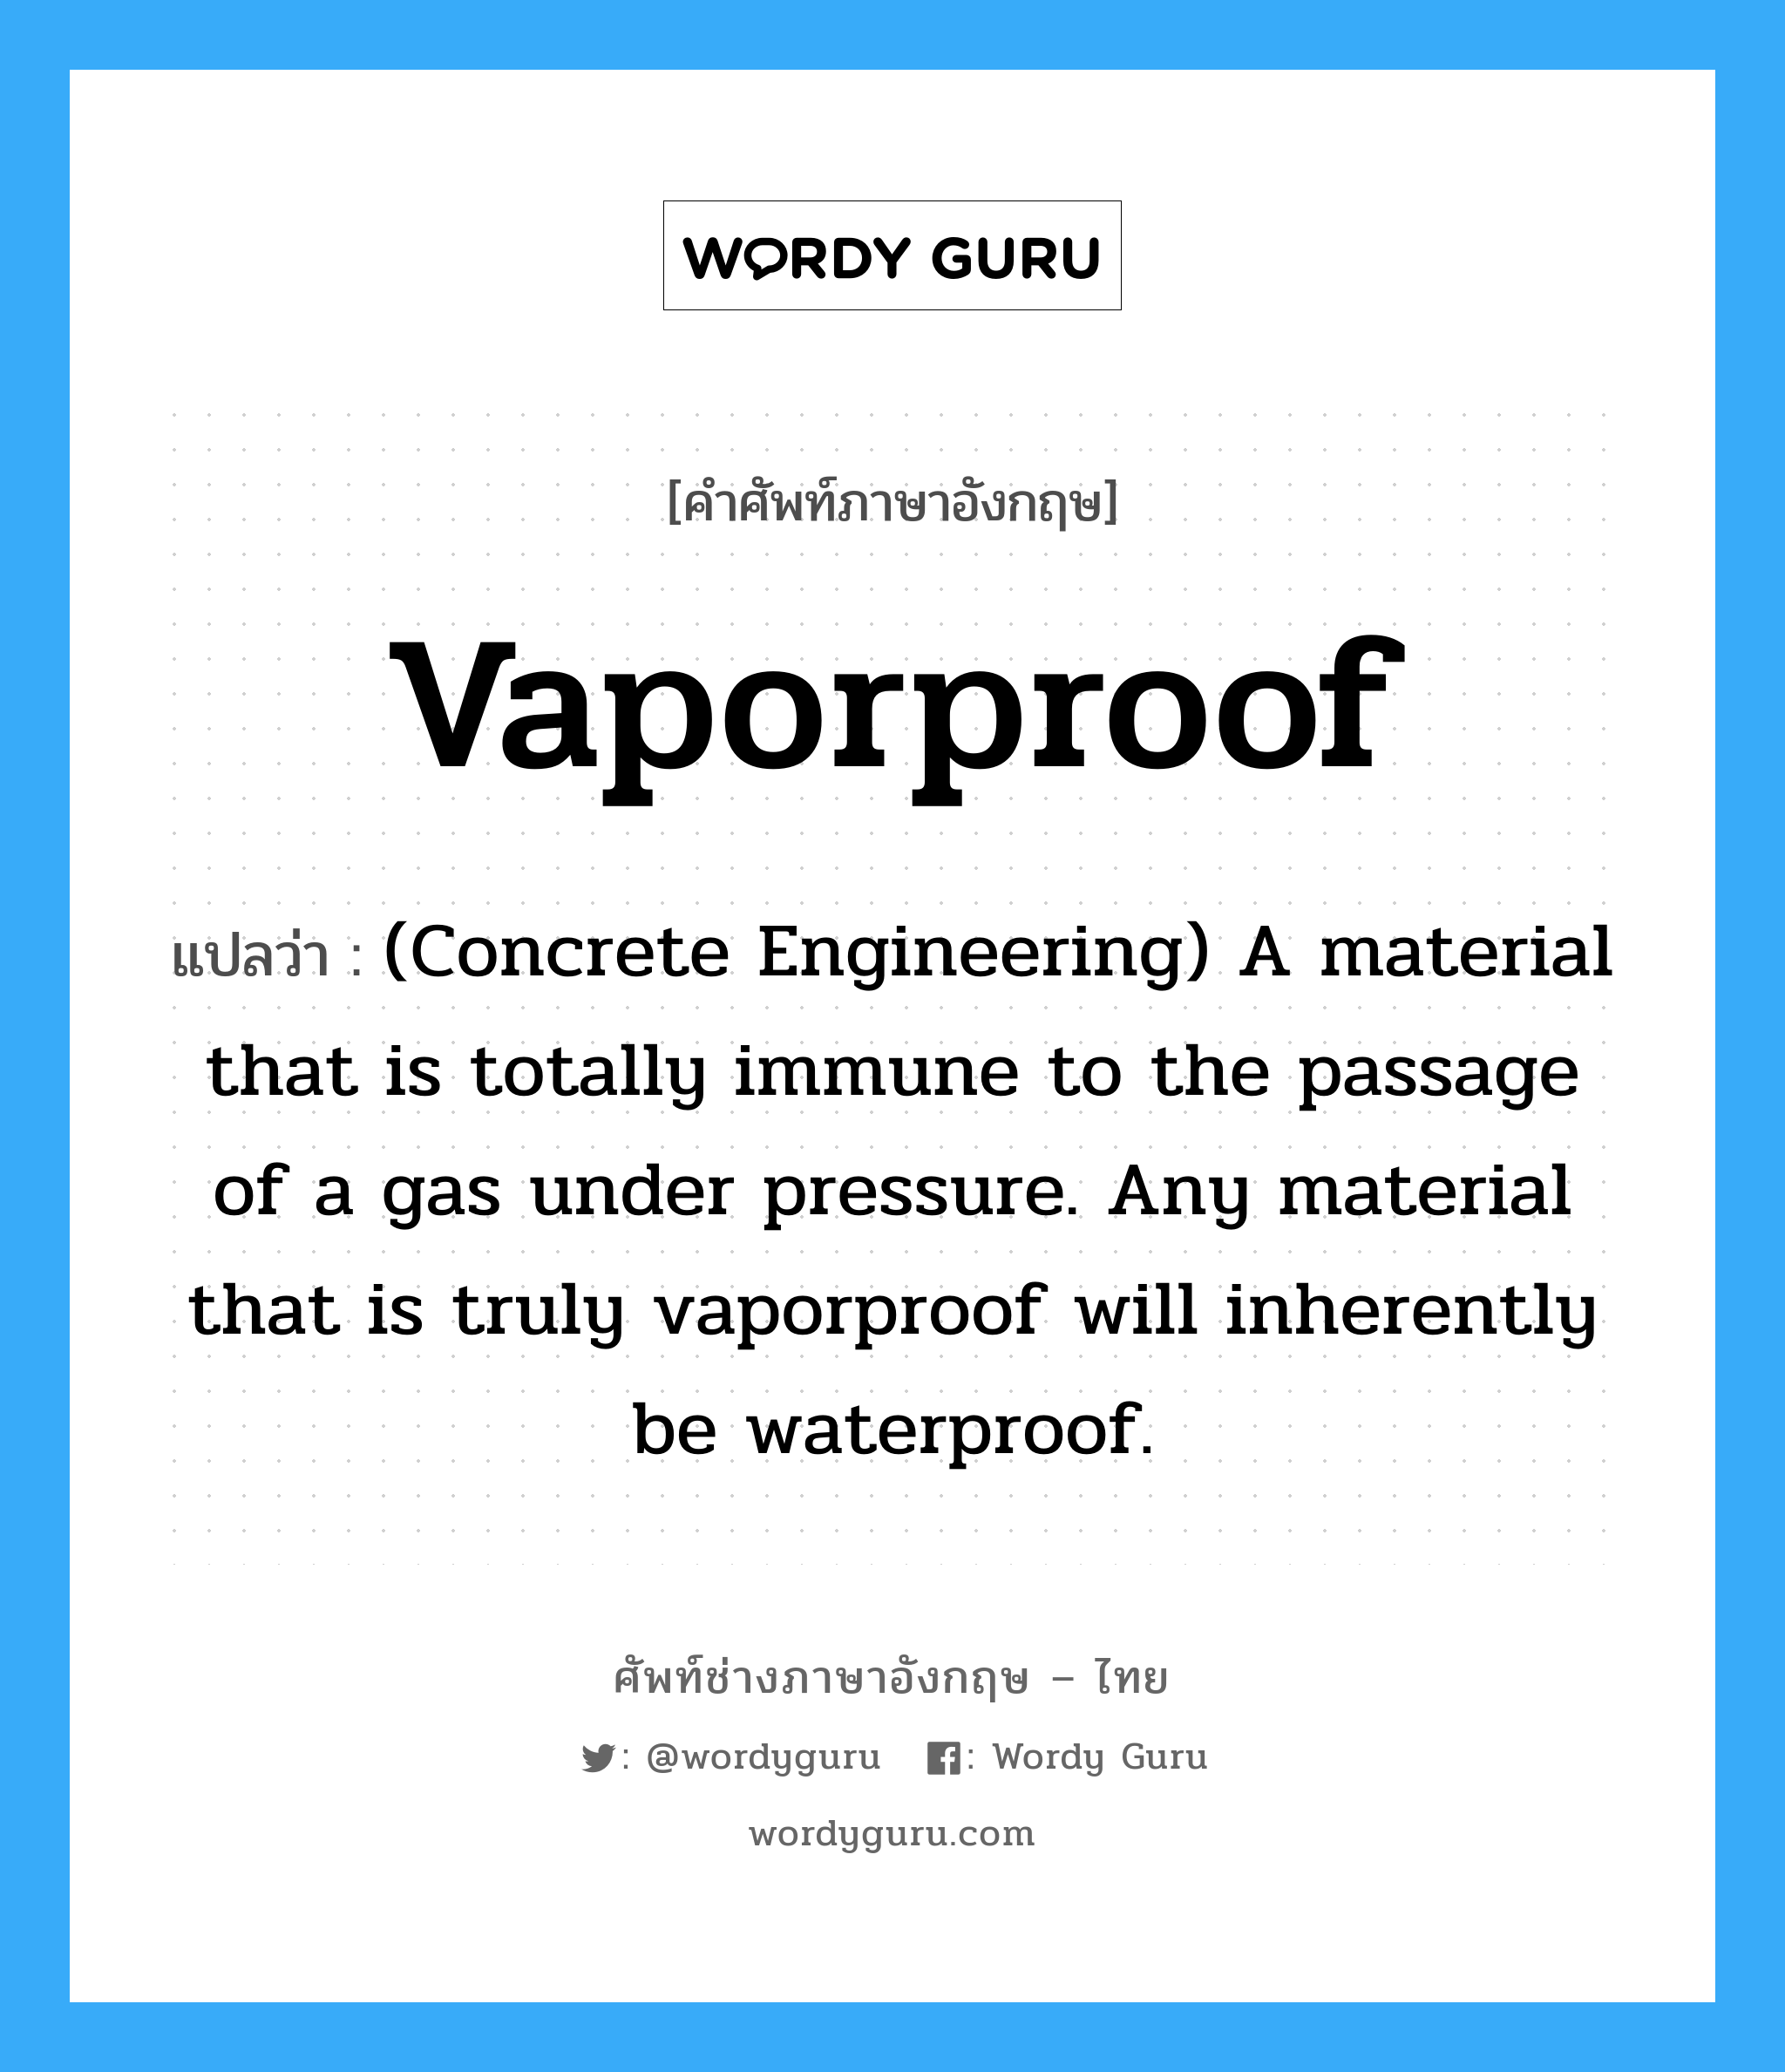 Vaporproof แปลว่า?, คำศัพท์ช่างภาษาอังกฤษ - ไทย Vaporproof คำศัพท์ภาษาอังกฤษ Vaporproof แปลว่า (Concrete Engineering) A material that is totally immune to the passage of a gas under pressure. Any material that is truly vaporproof will inherently be waterproof.